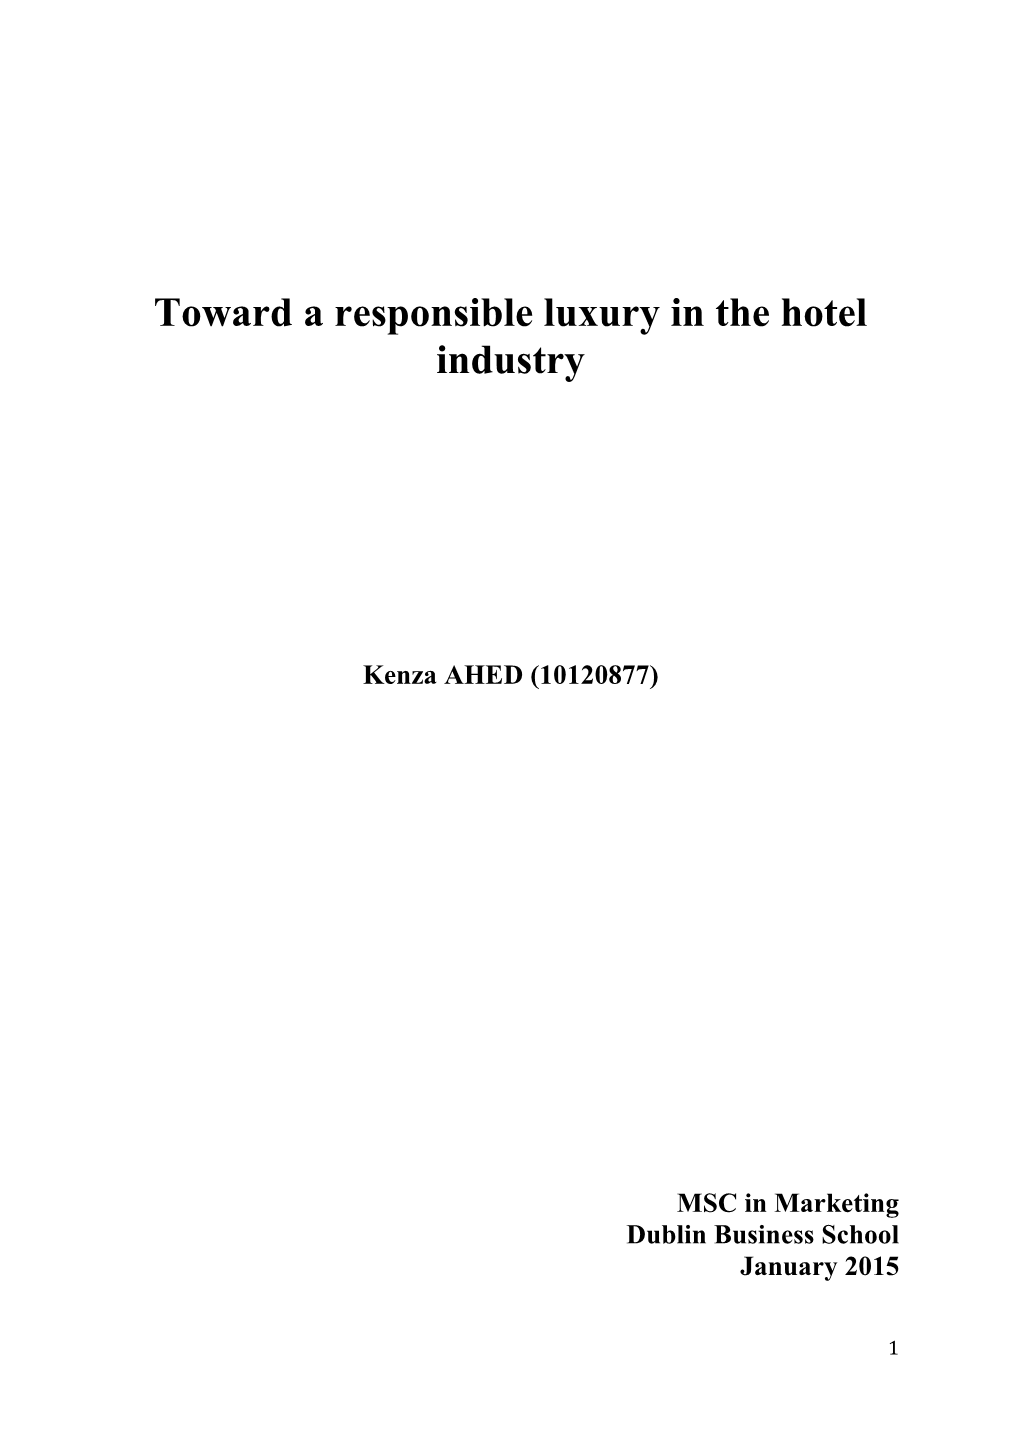 Toward a Responsible Luxury in the Hotel Industry